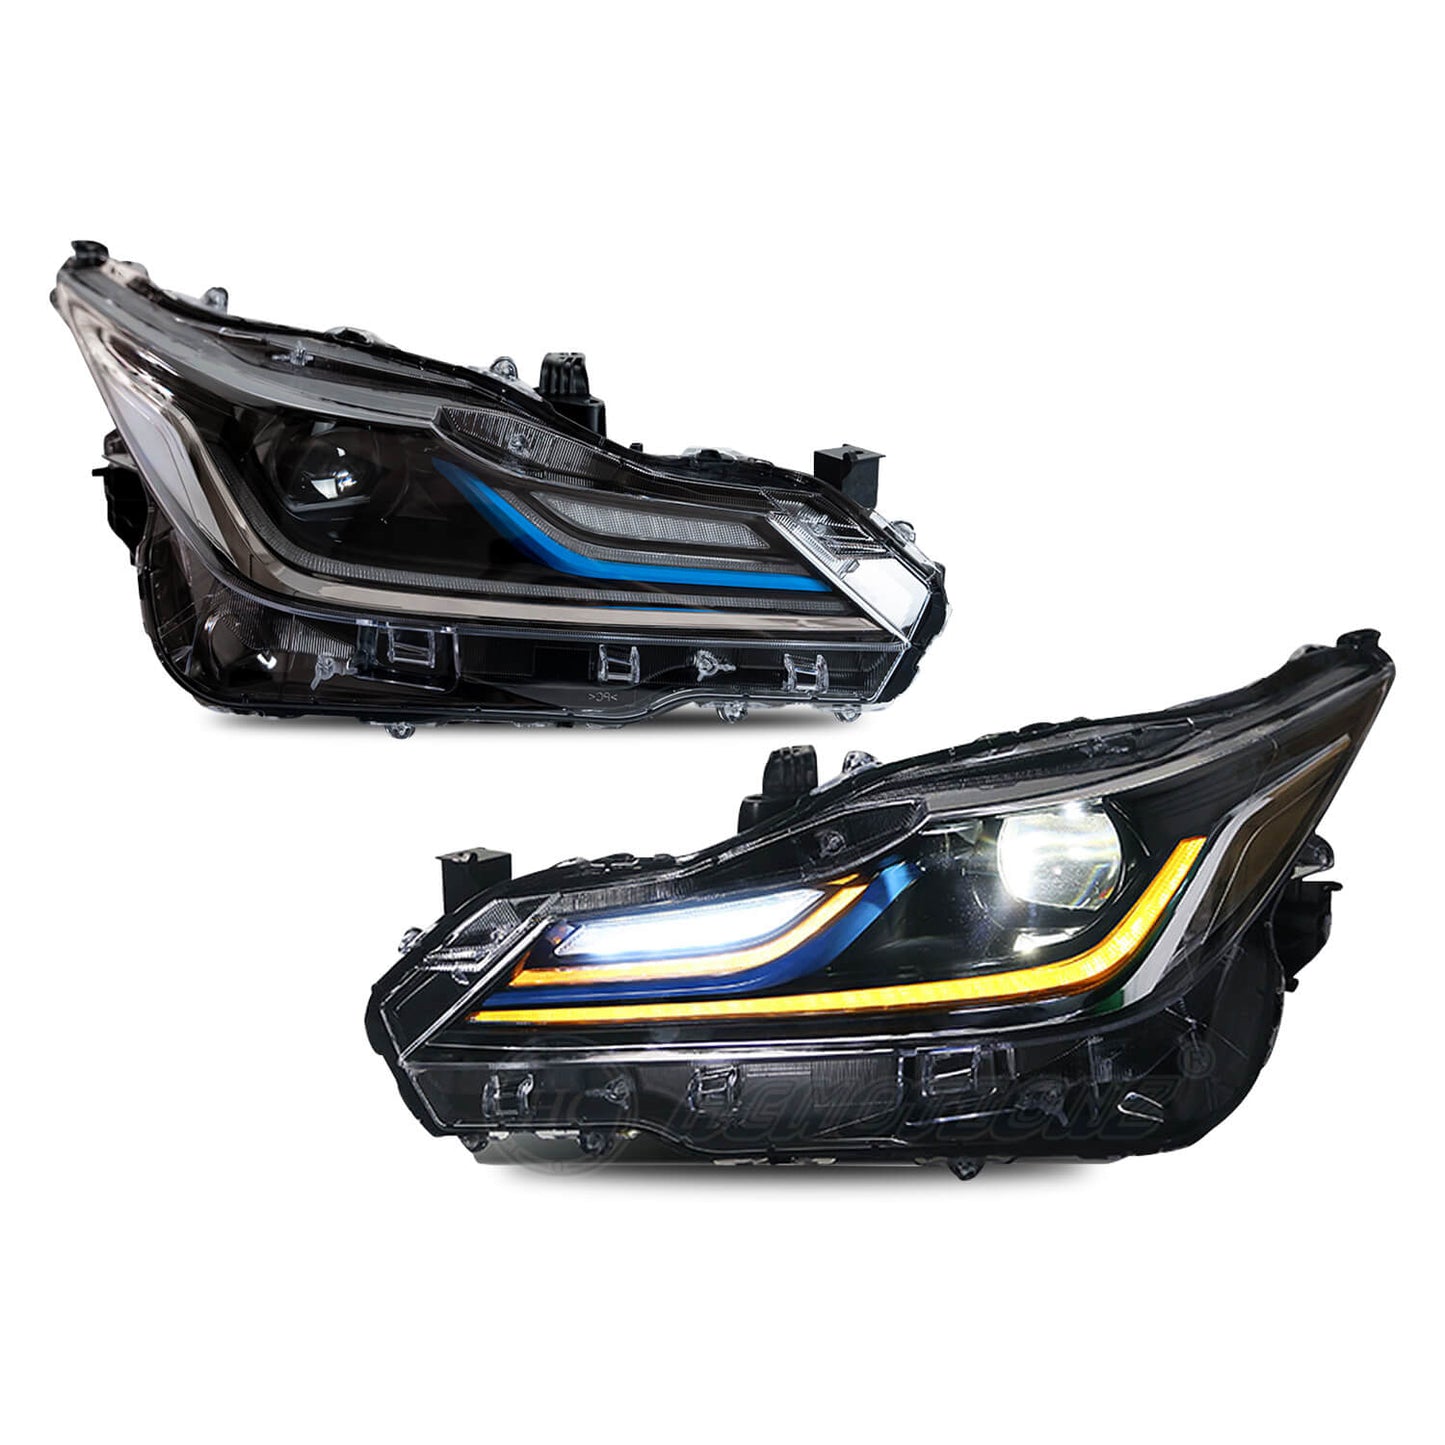 HCMOTION For Toyota Corolla 2019-2022 middel east version LED Headlights